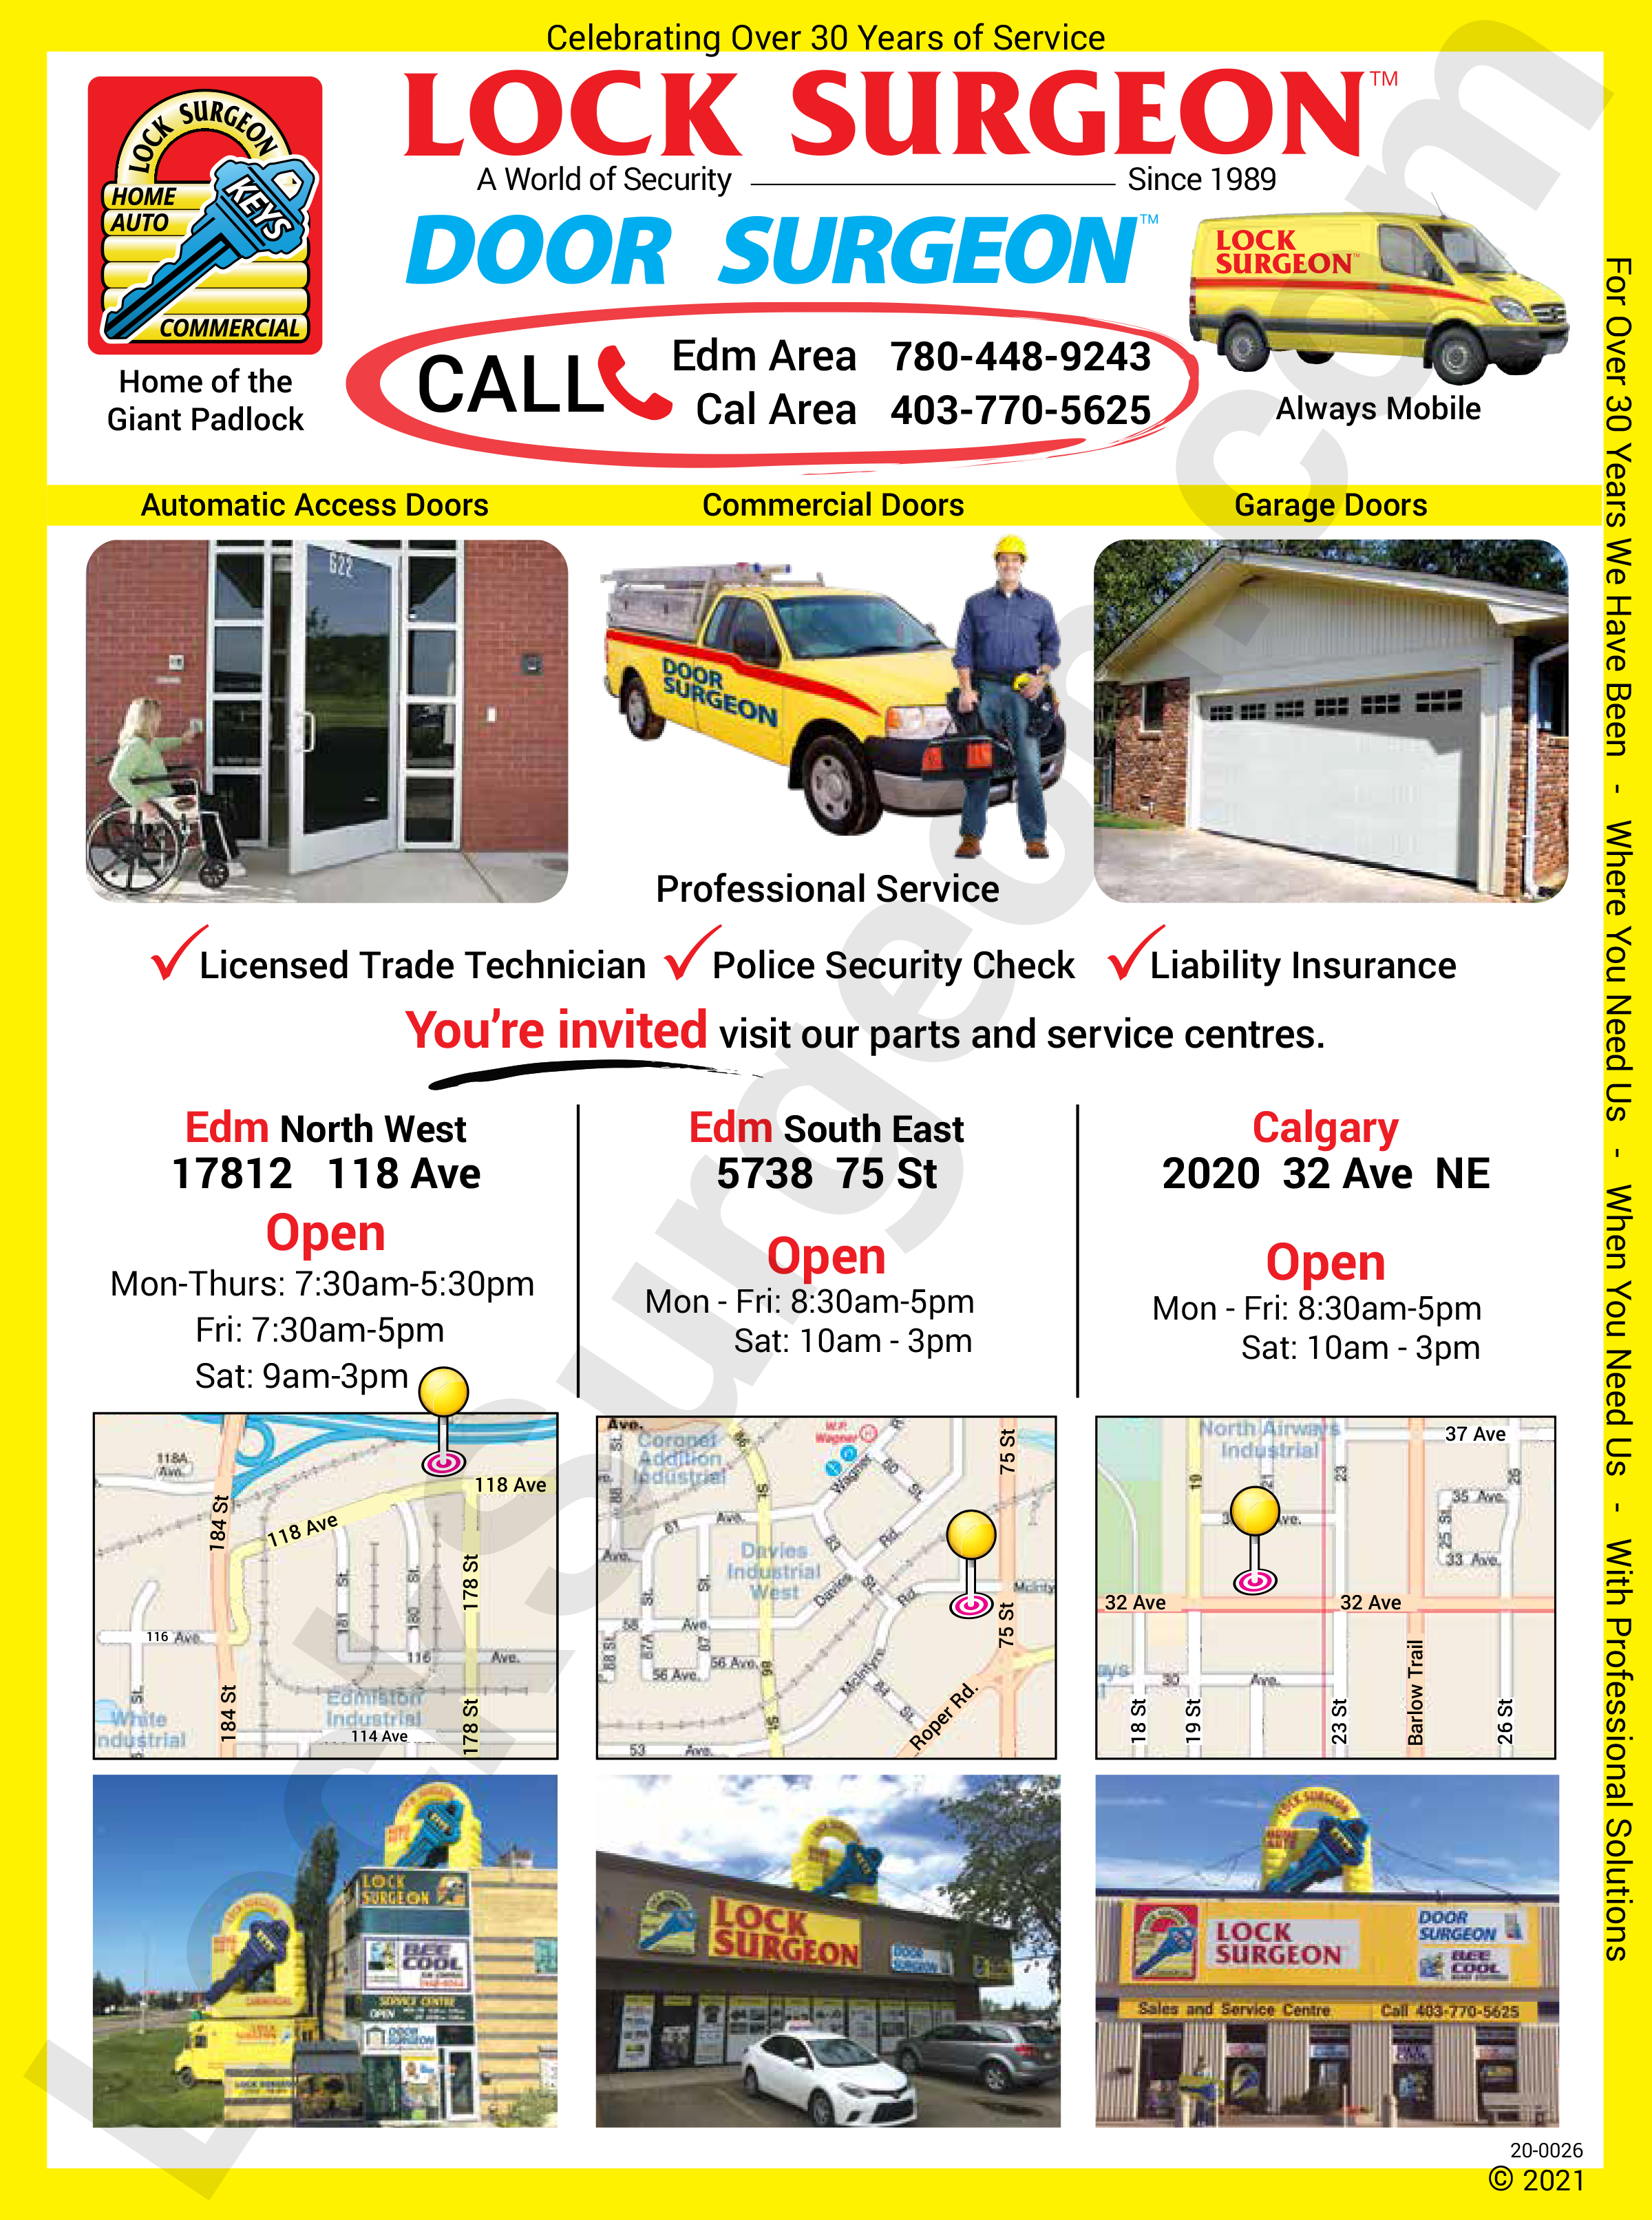 Always mobile repair and service for automatic access doors, commercial doors & garage doors. Professional service, licensed trade technician, police security checks, liability insurance.